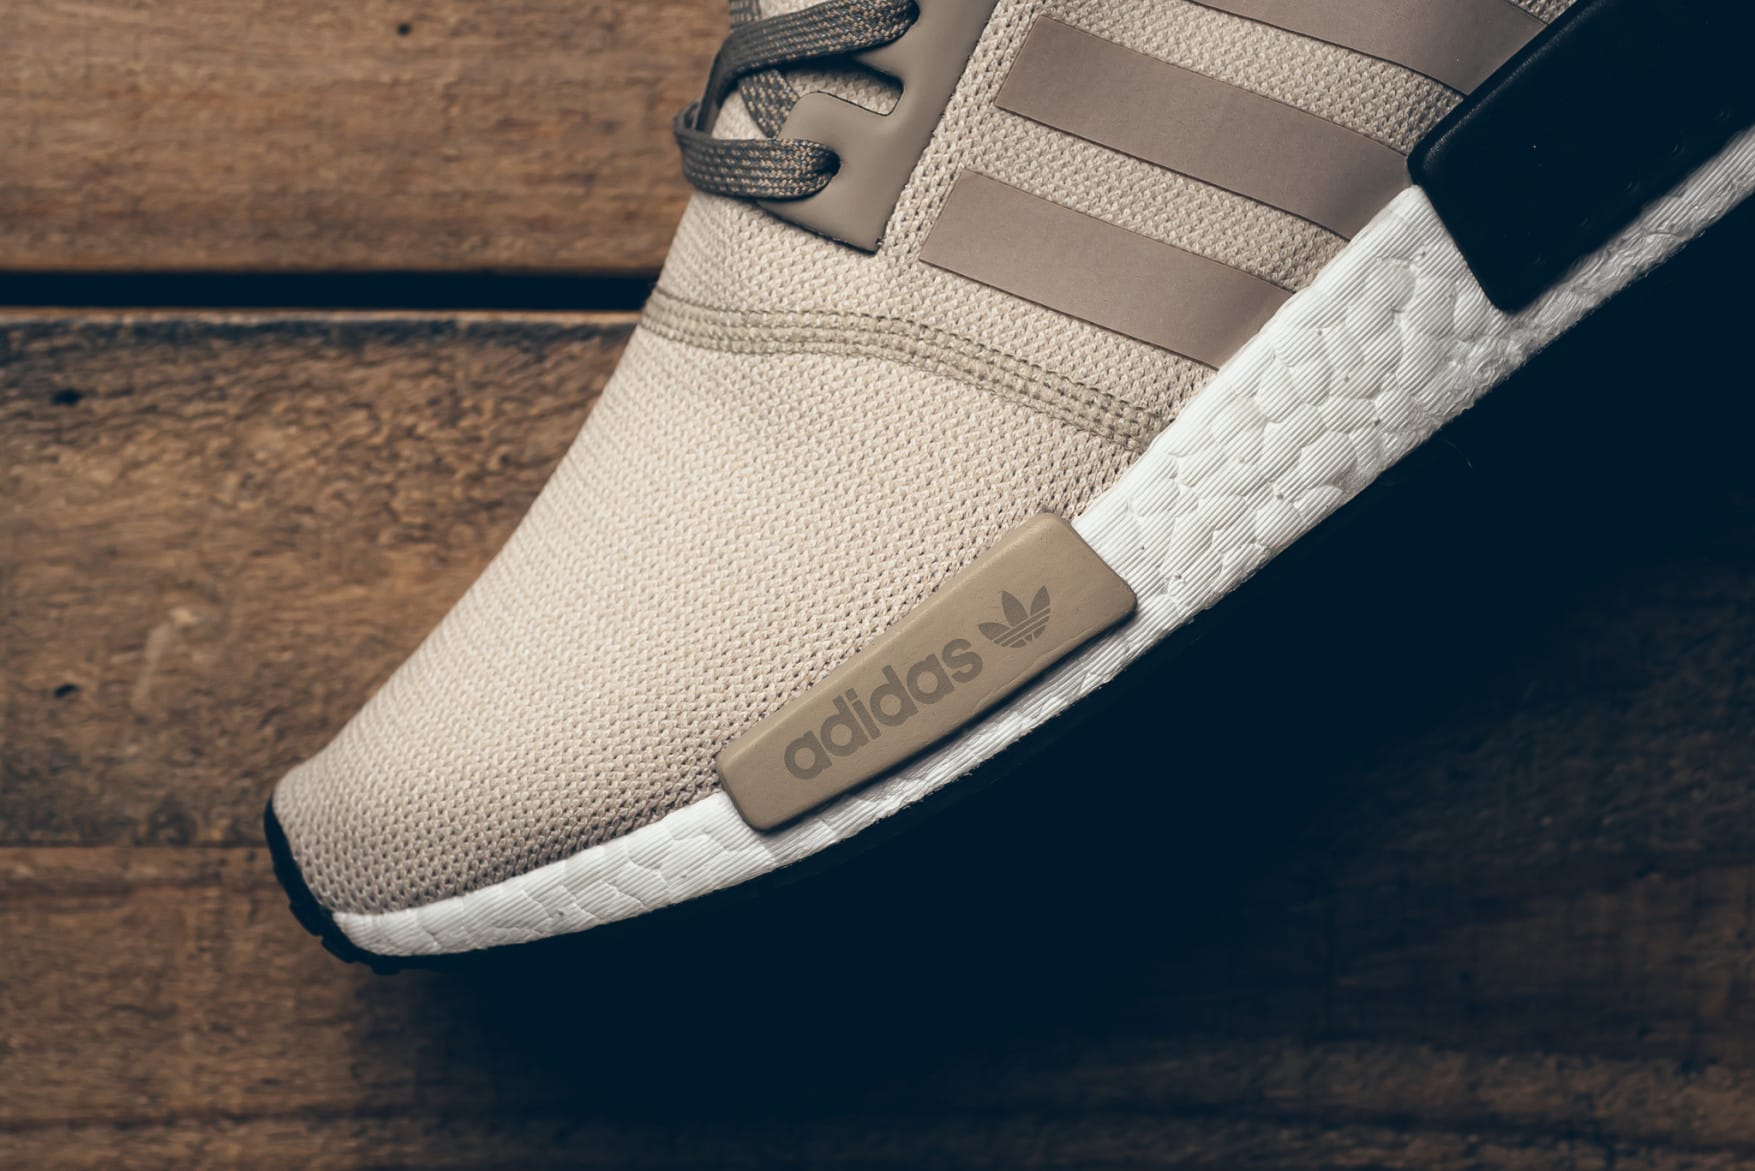 adidas Originals Releases an Earth Tone NMD R1 | HYPEBEAST